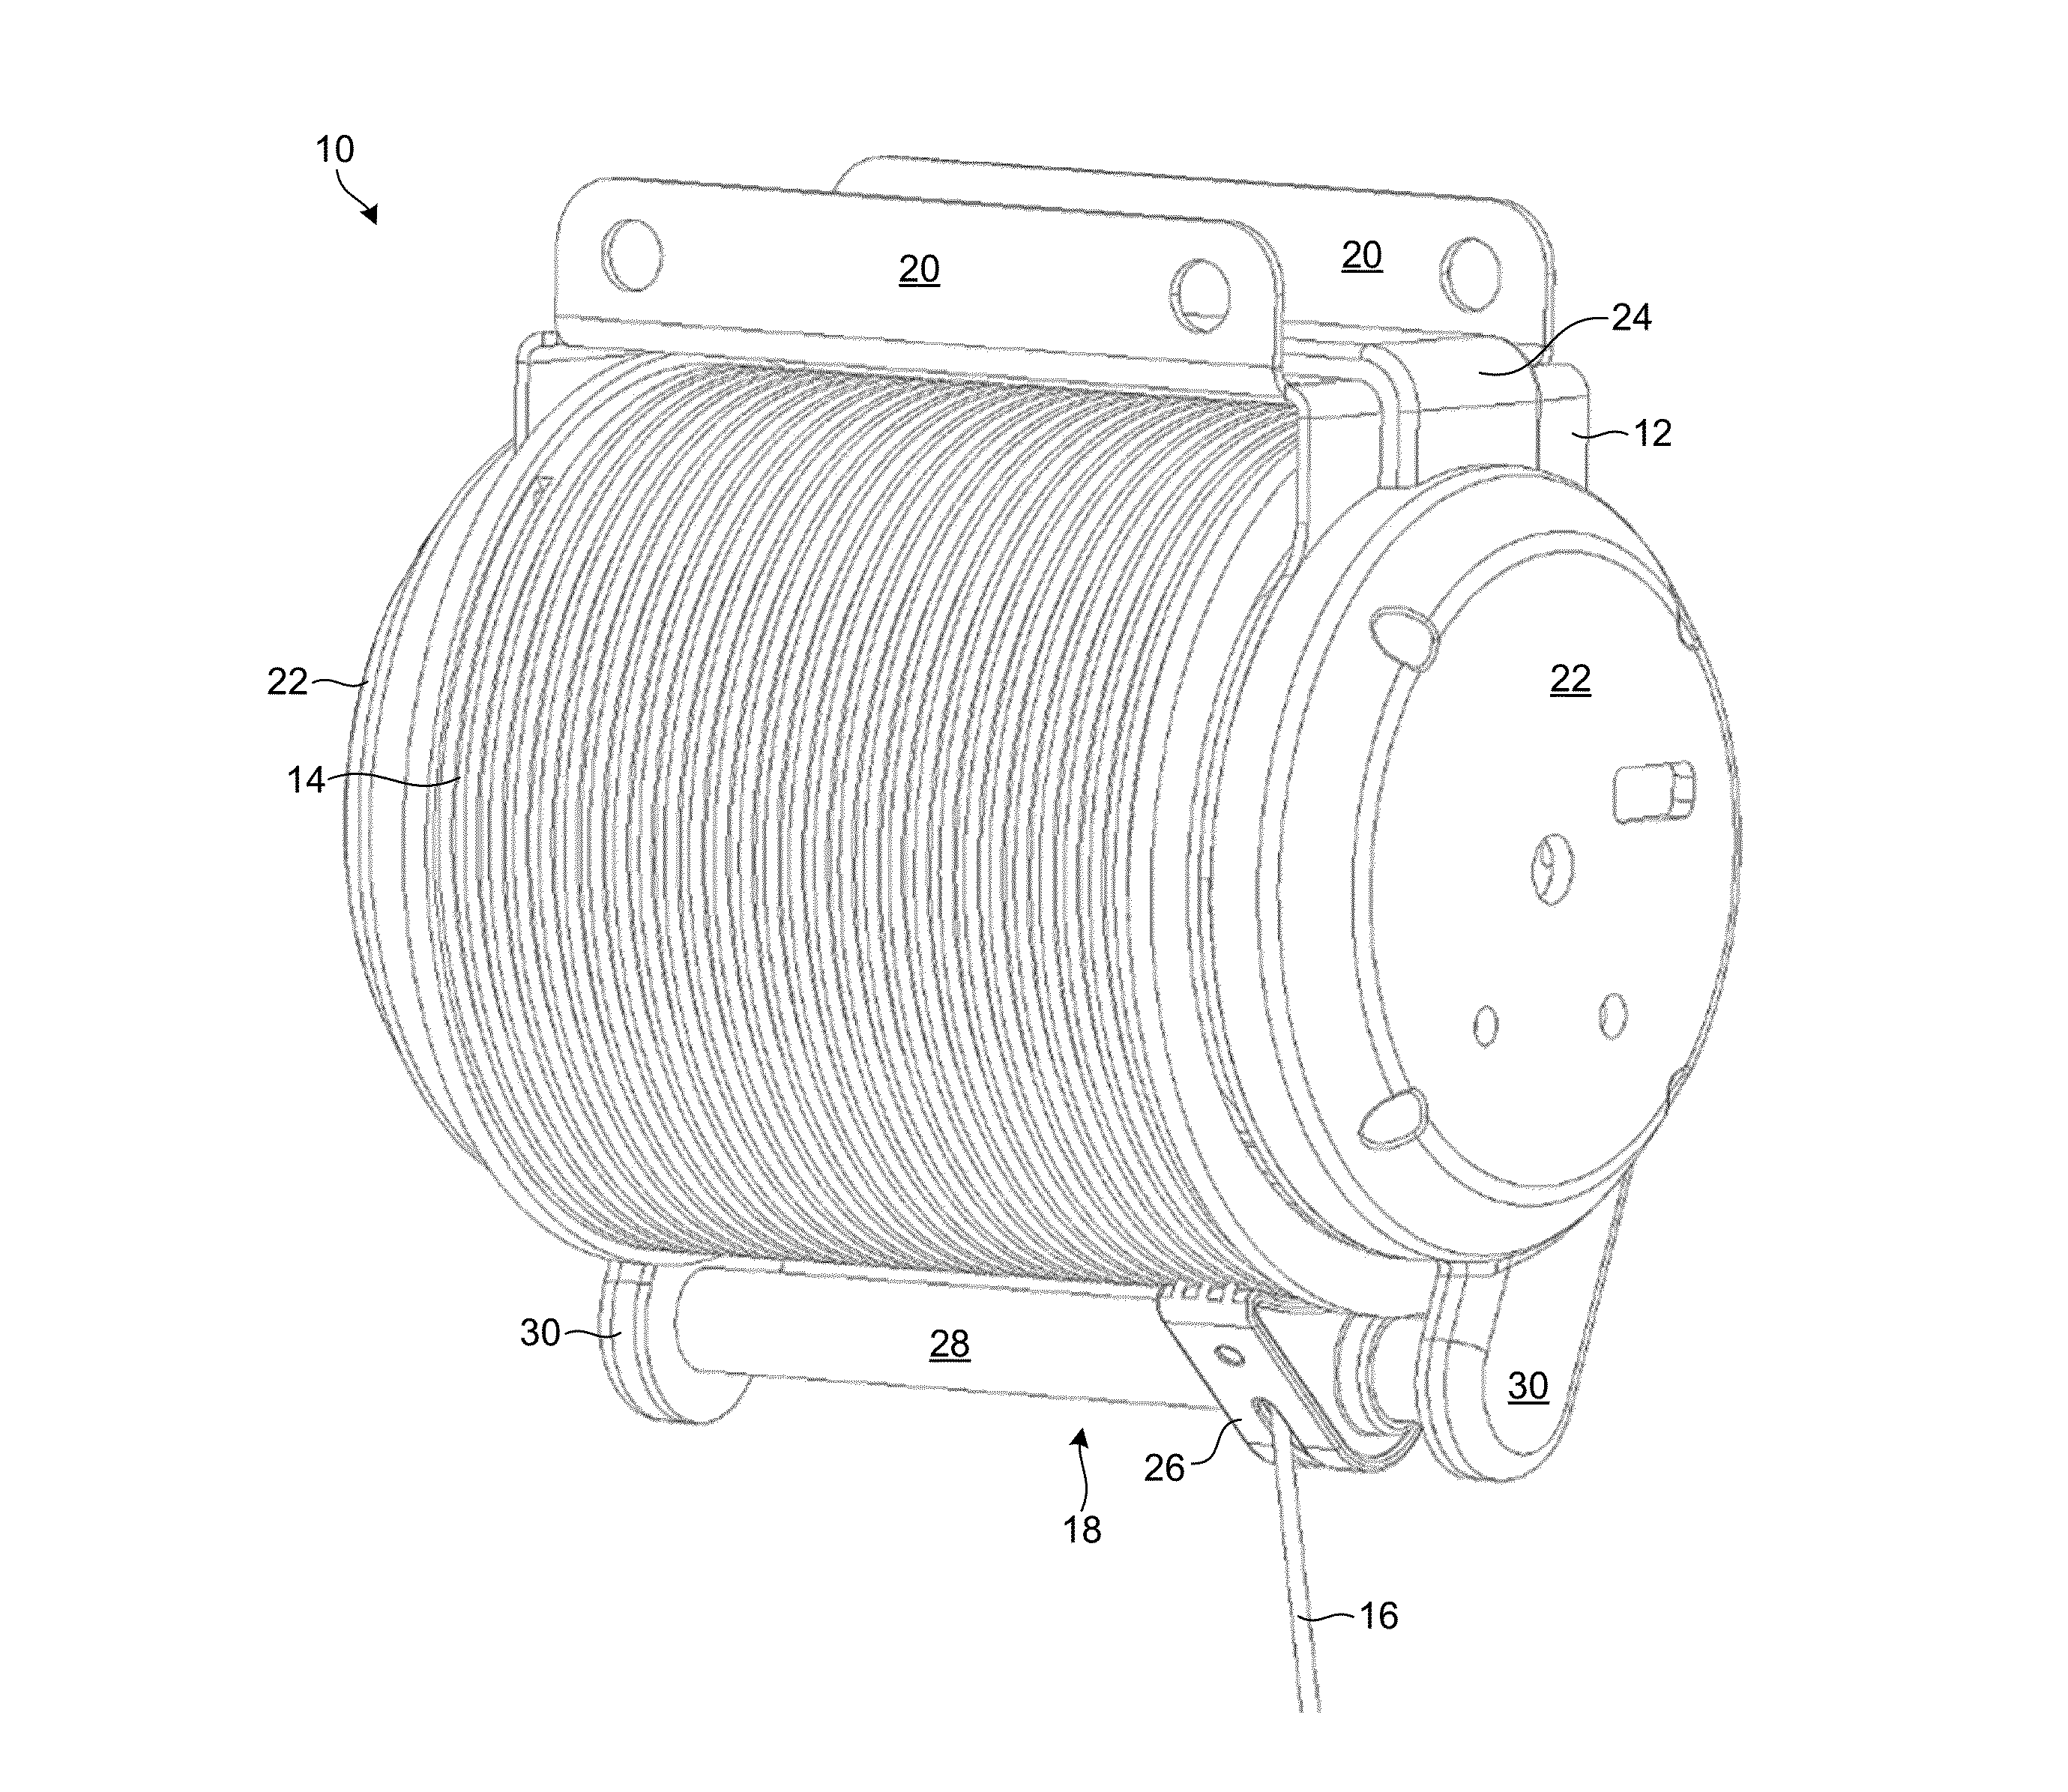 Grooved drum and associated roller for motorized lifting device